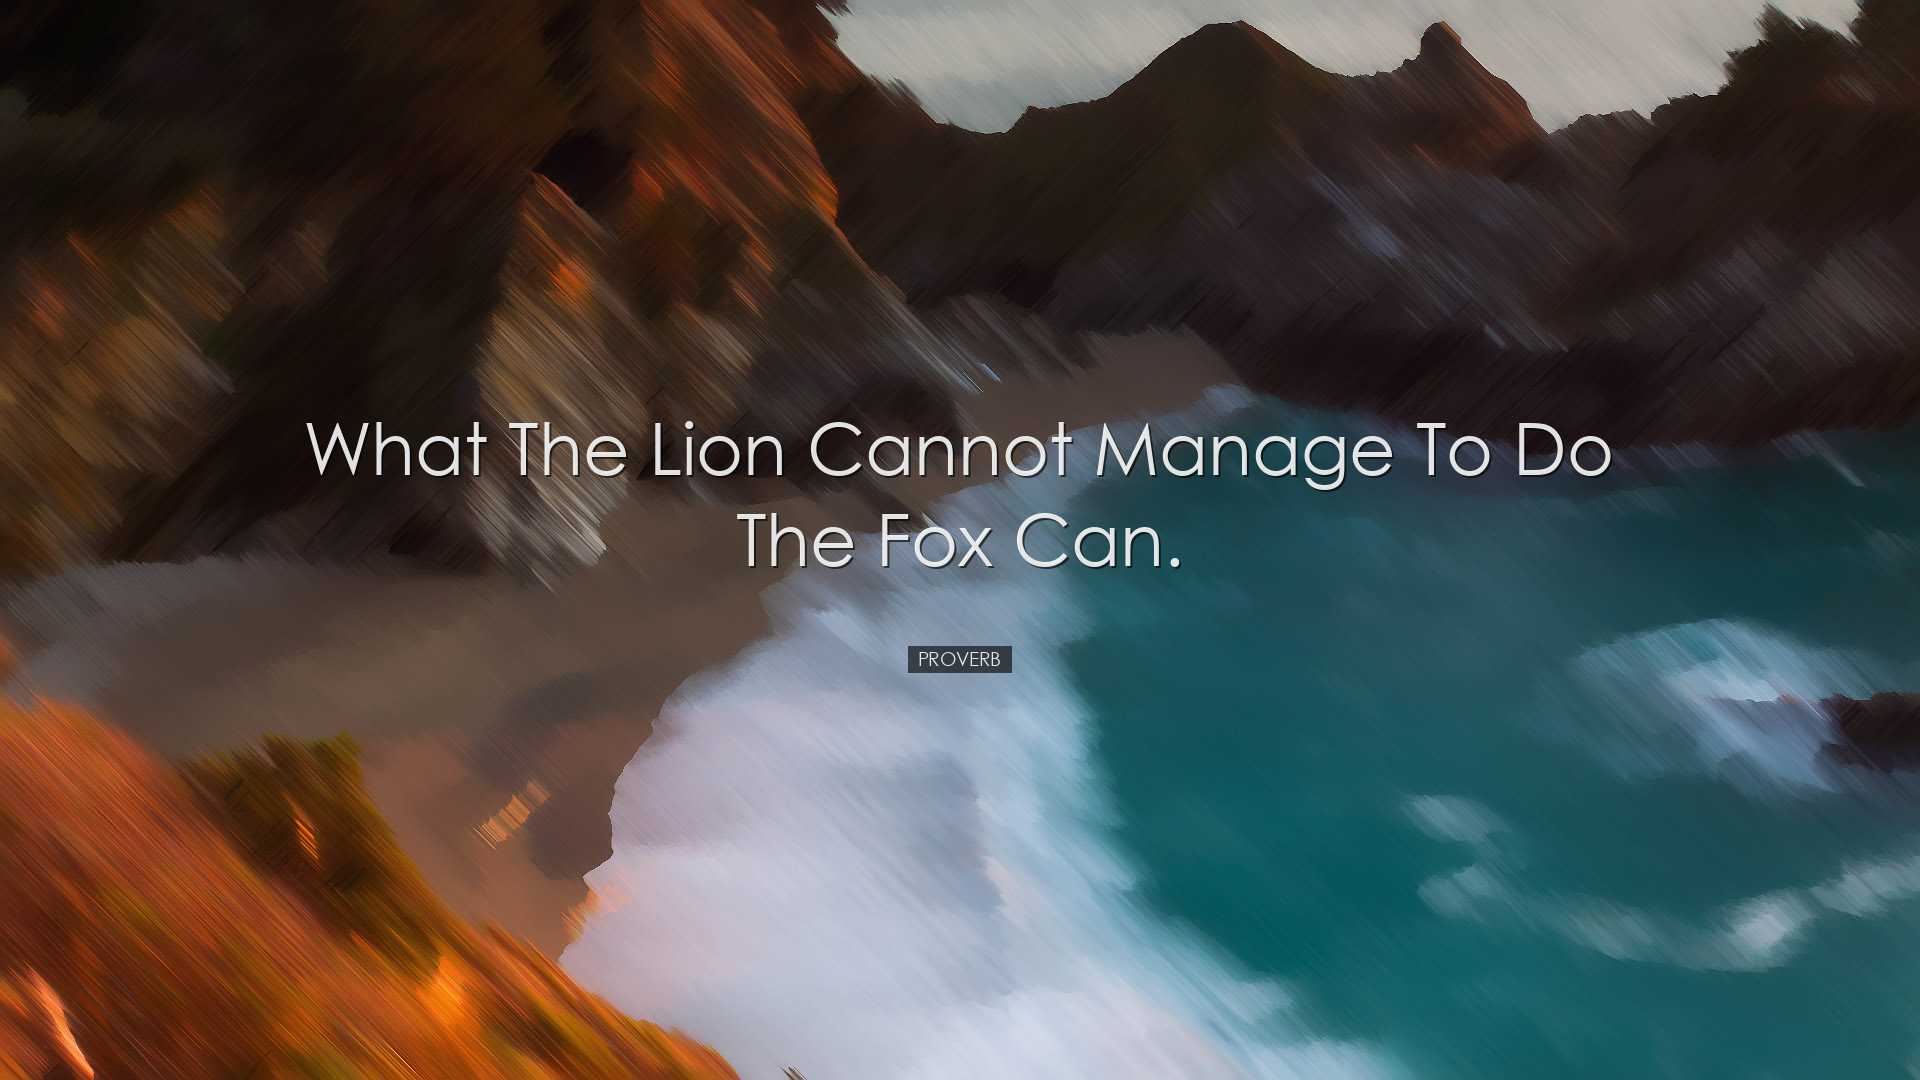 What the lion cannot manage to do the fox can. - Proverb